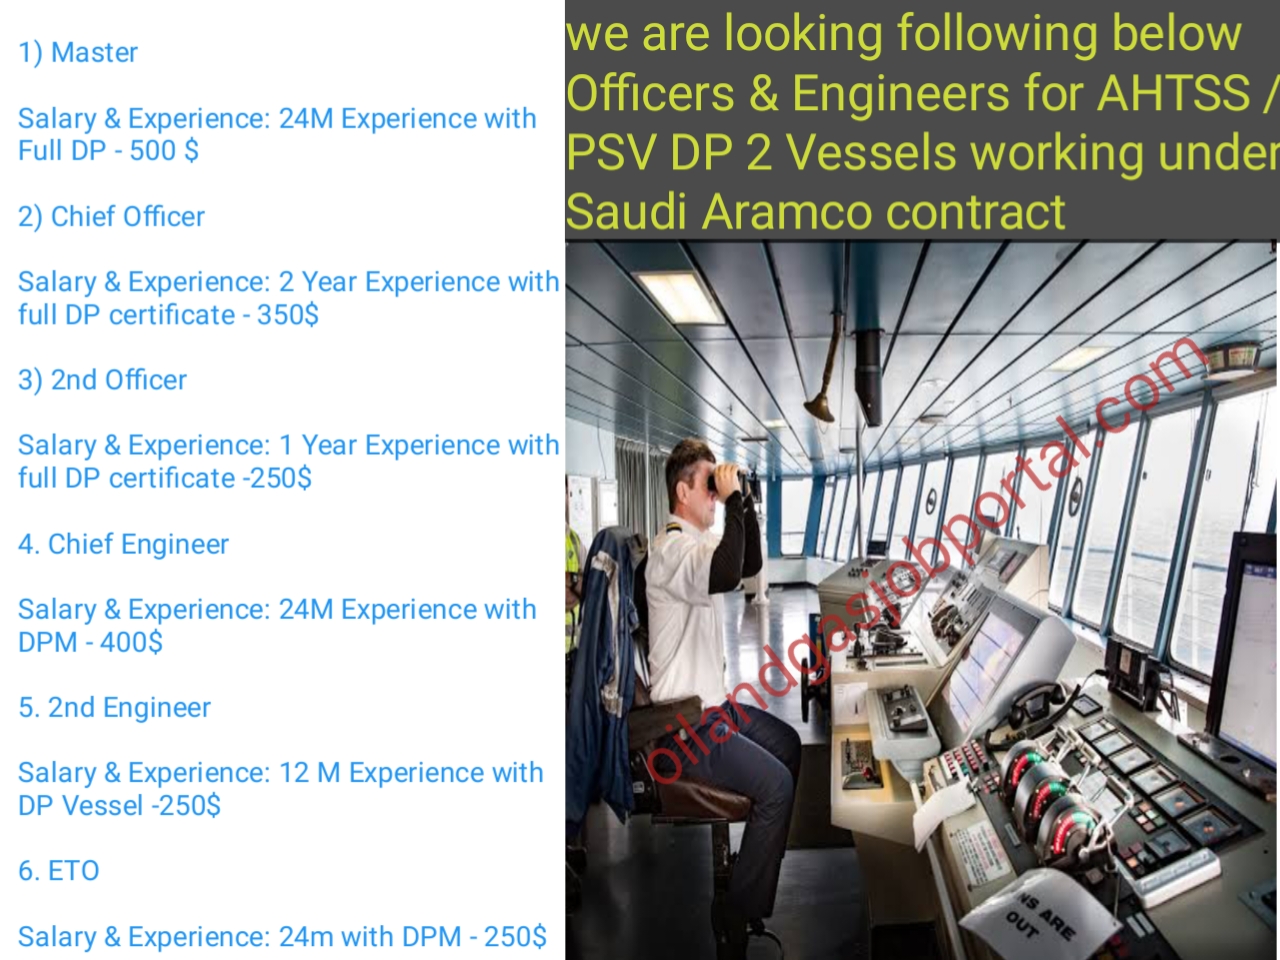 we are looking following below Officers & Engineers for AHTSS / PSV DP 2 Vessels working under Saudi Aramco contract